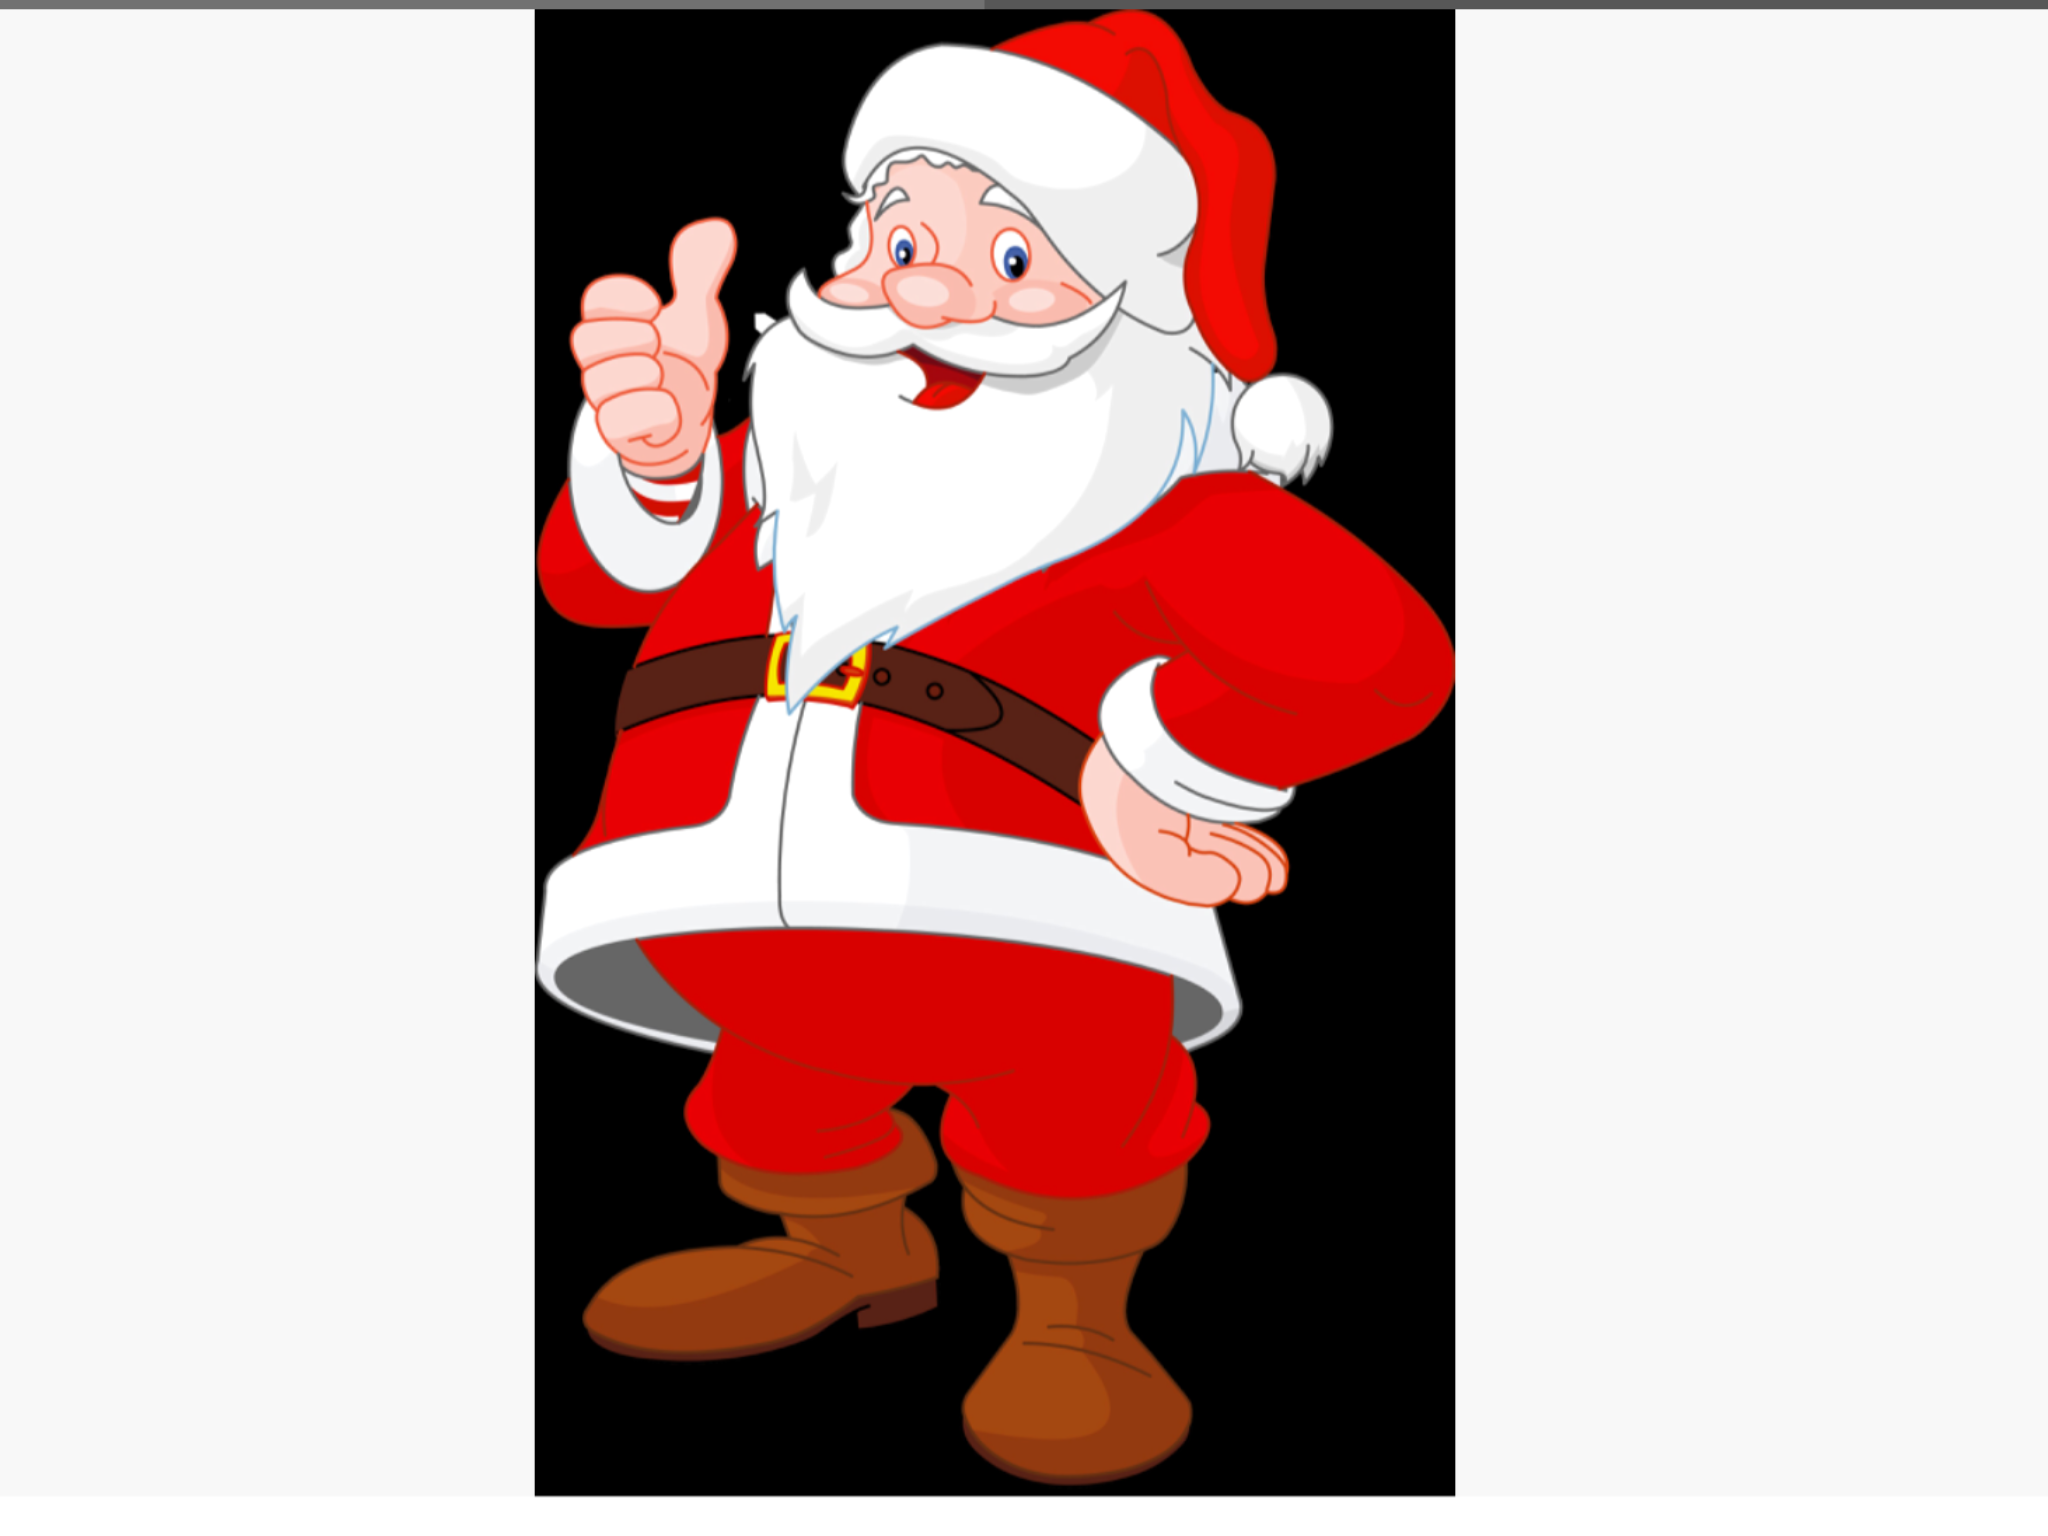 SANTA SAYS TYPE IN 581744 AND READ THAT REPORT NOW